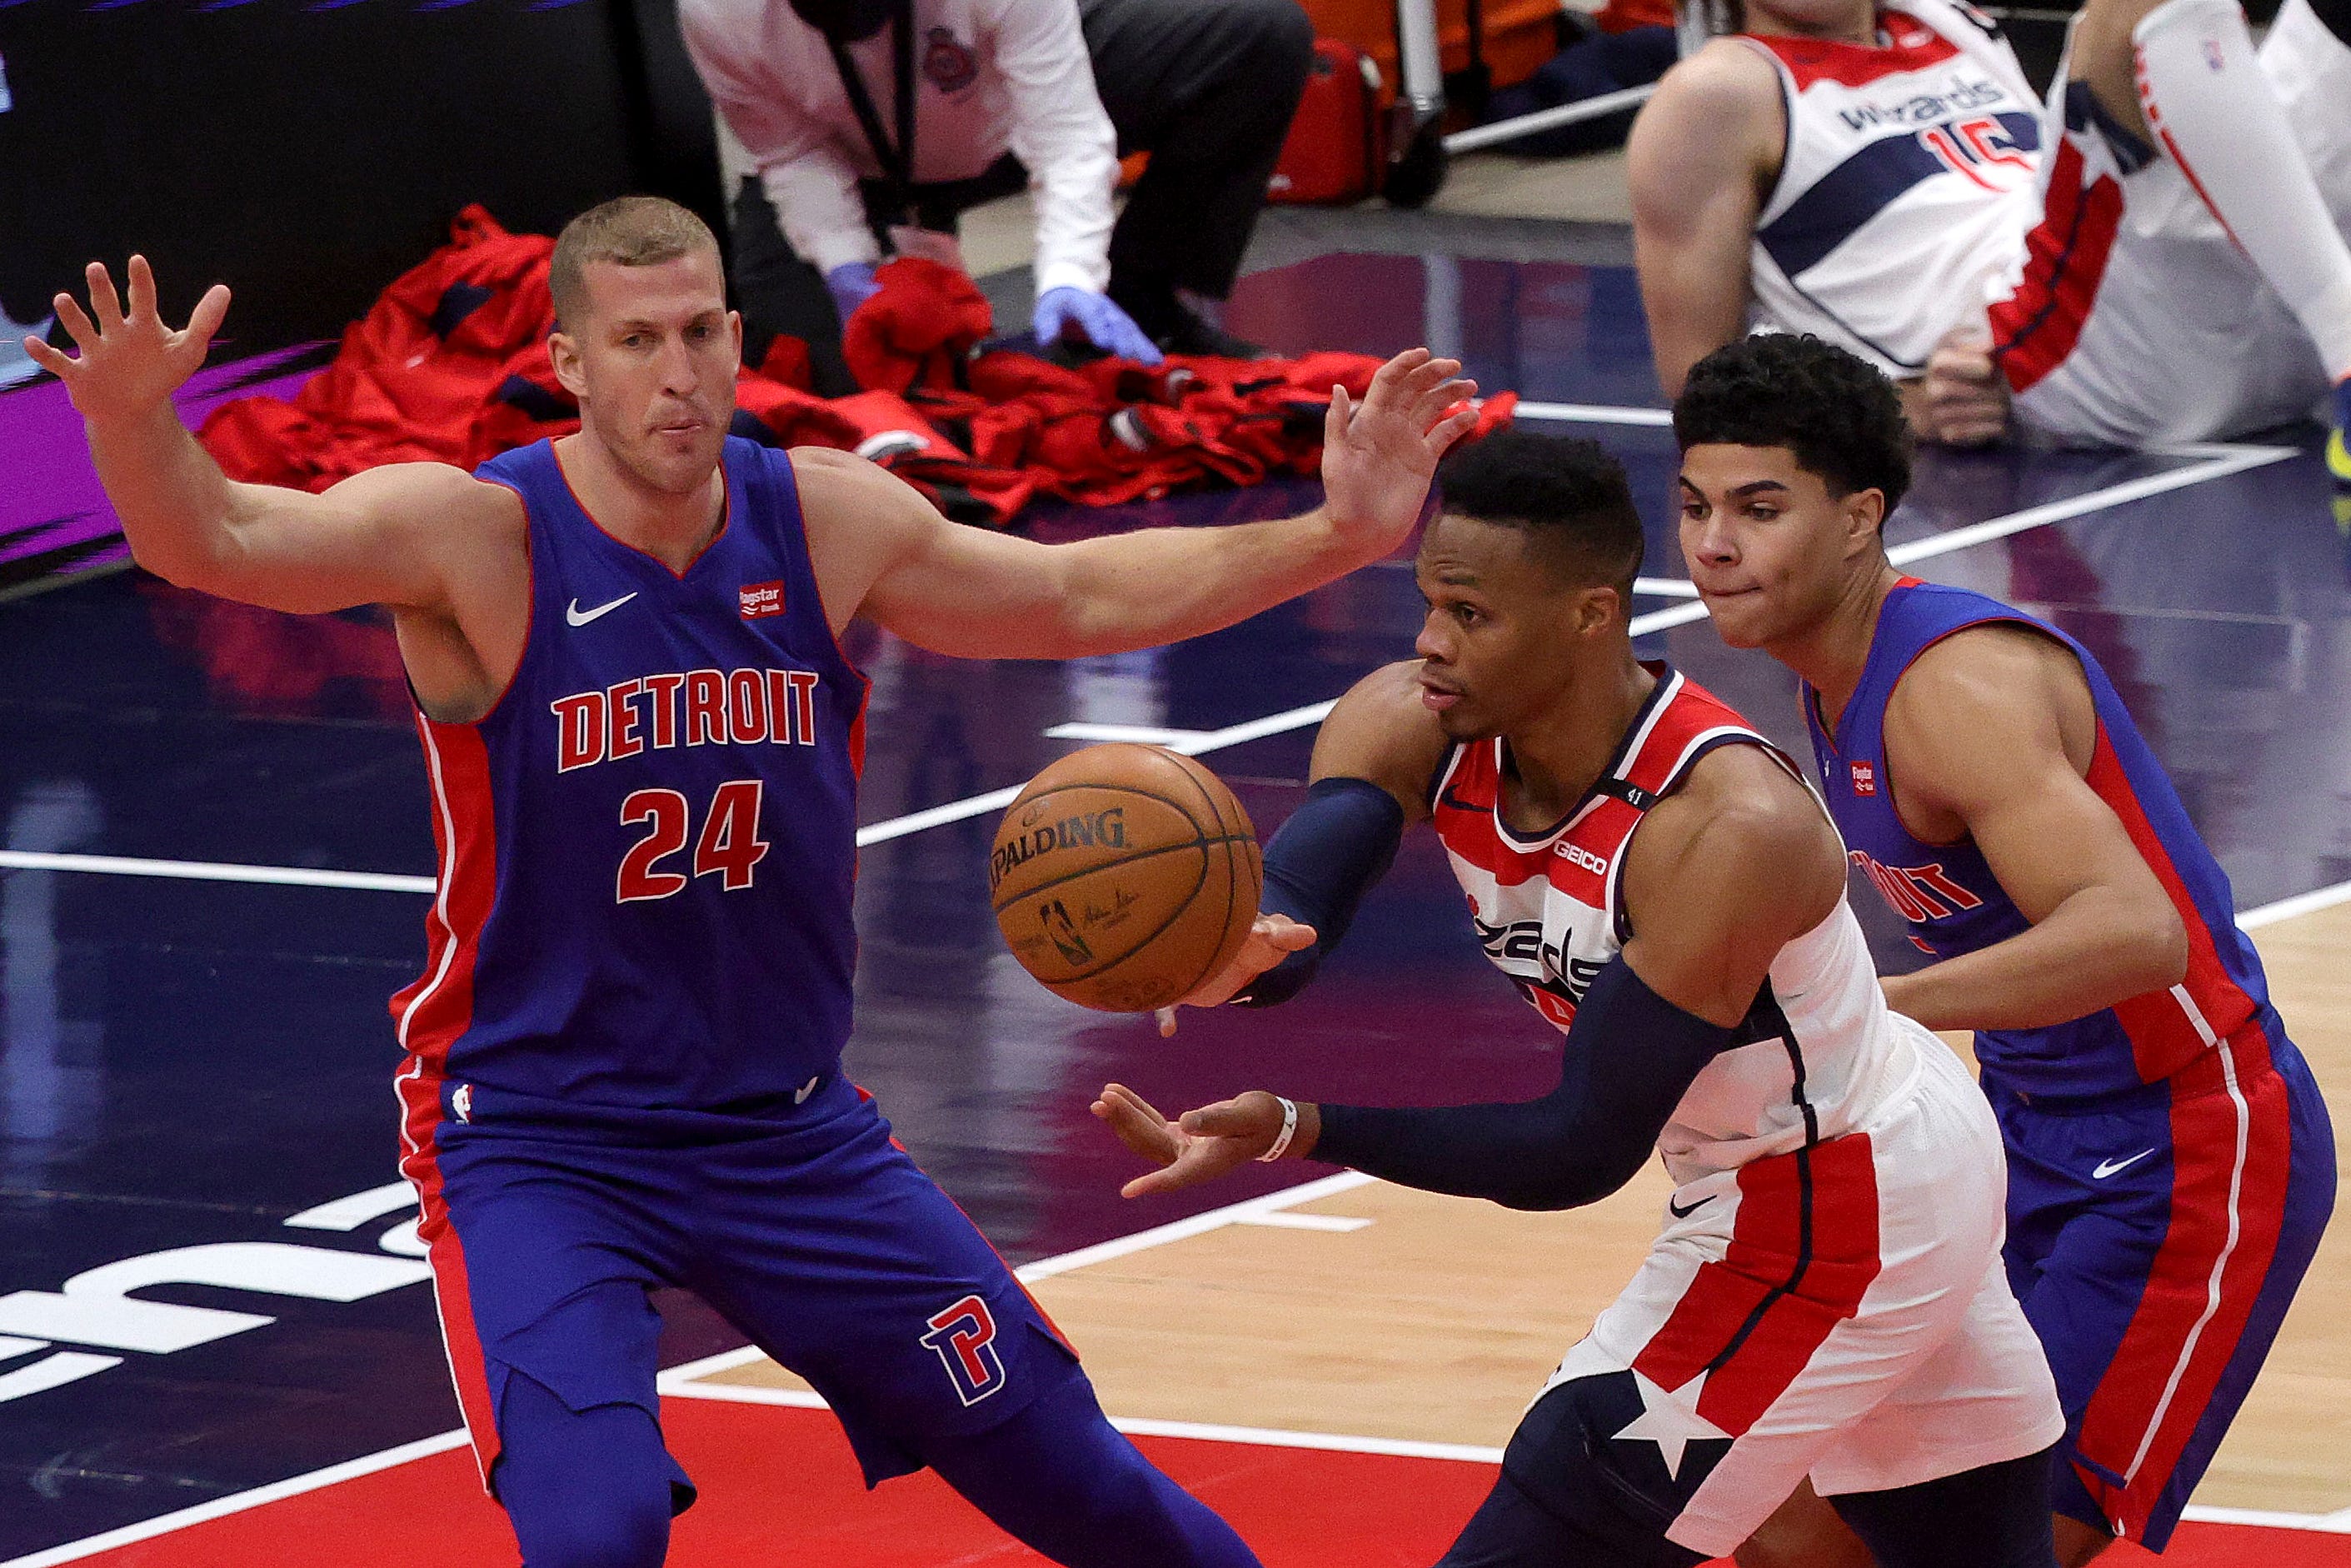 Washington Wizards Russell Westbrook (4) passes the ball between Detroit Pistons' Mason Plumlee (24) and Killian Hayes during the first half.